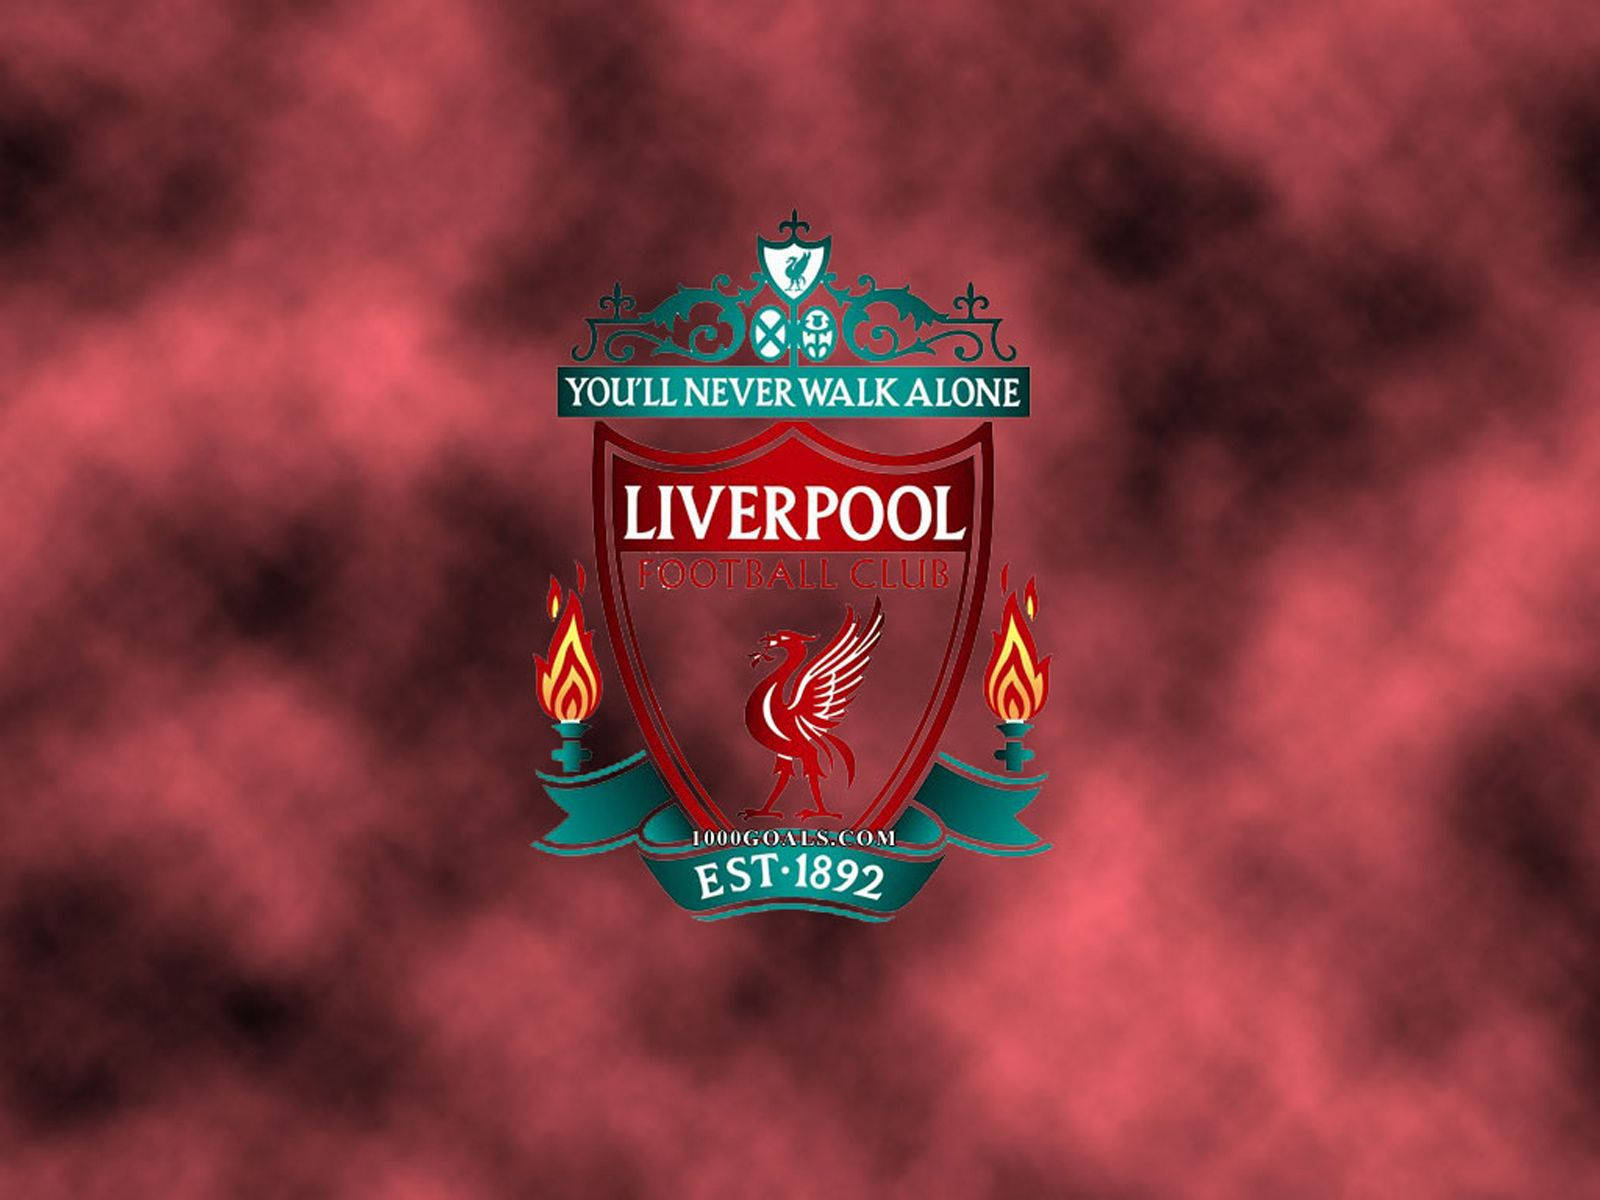 Fly The Red Flag High - Liverpool Fc Logo Background